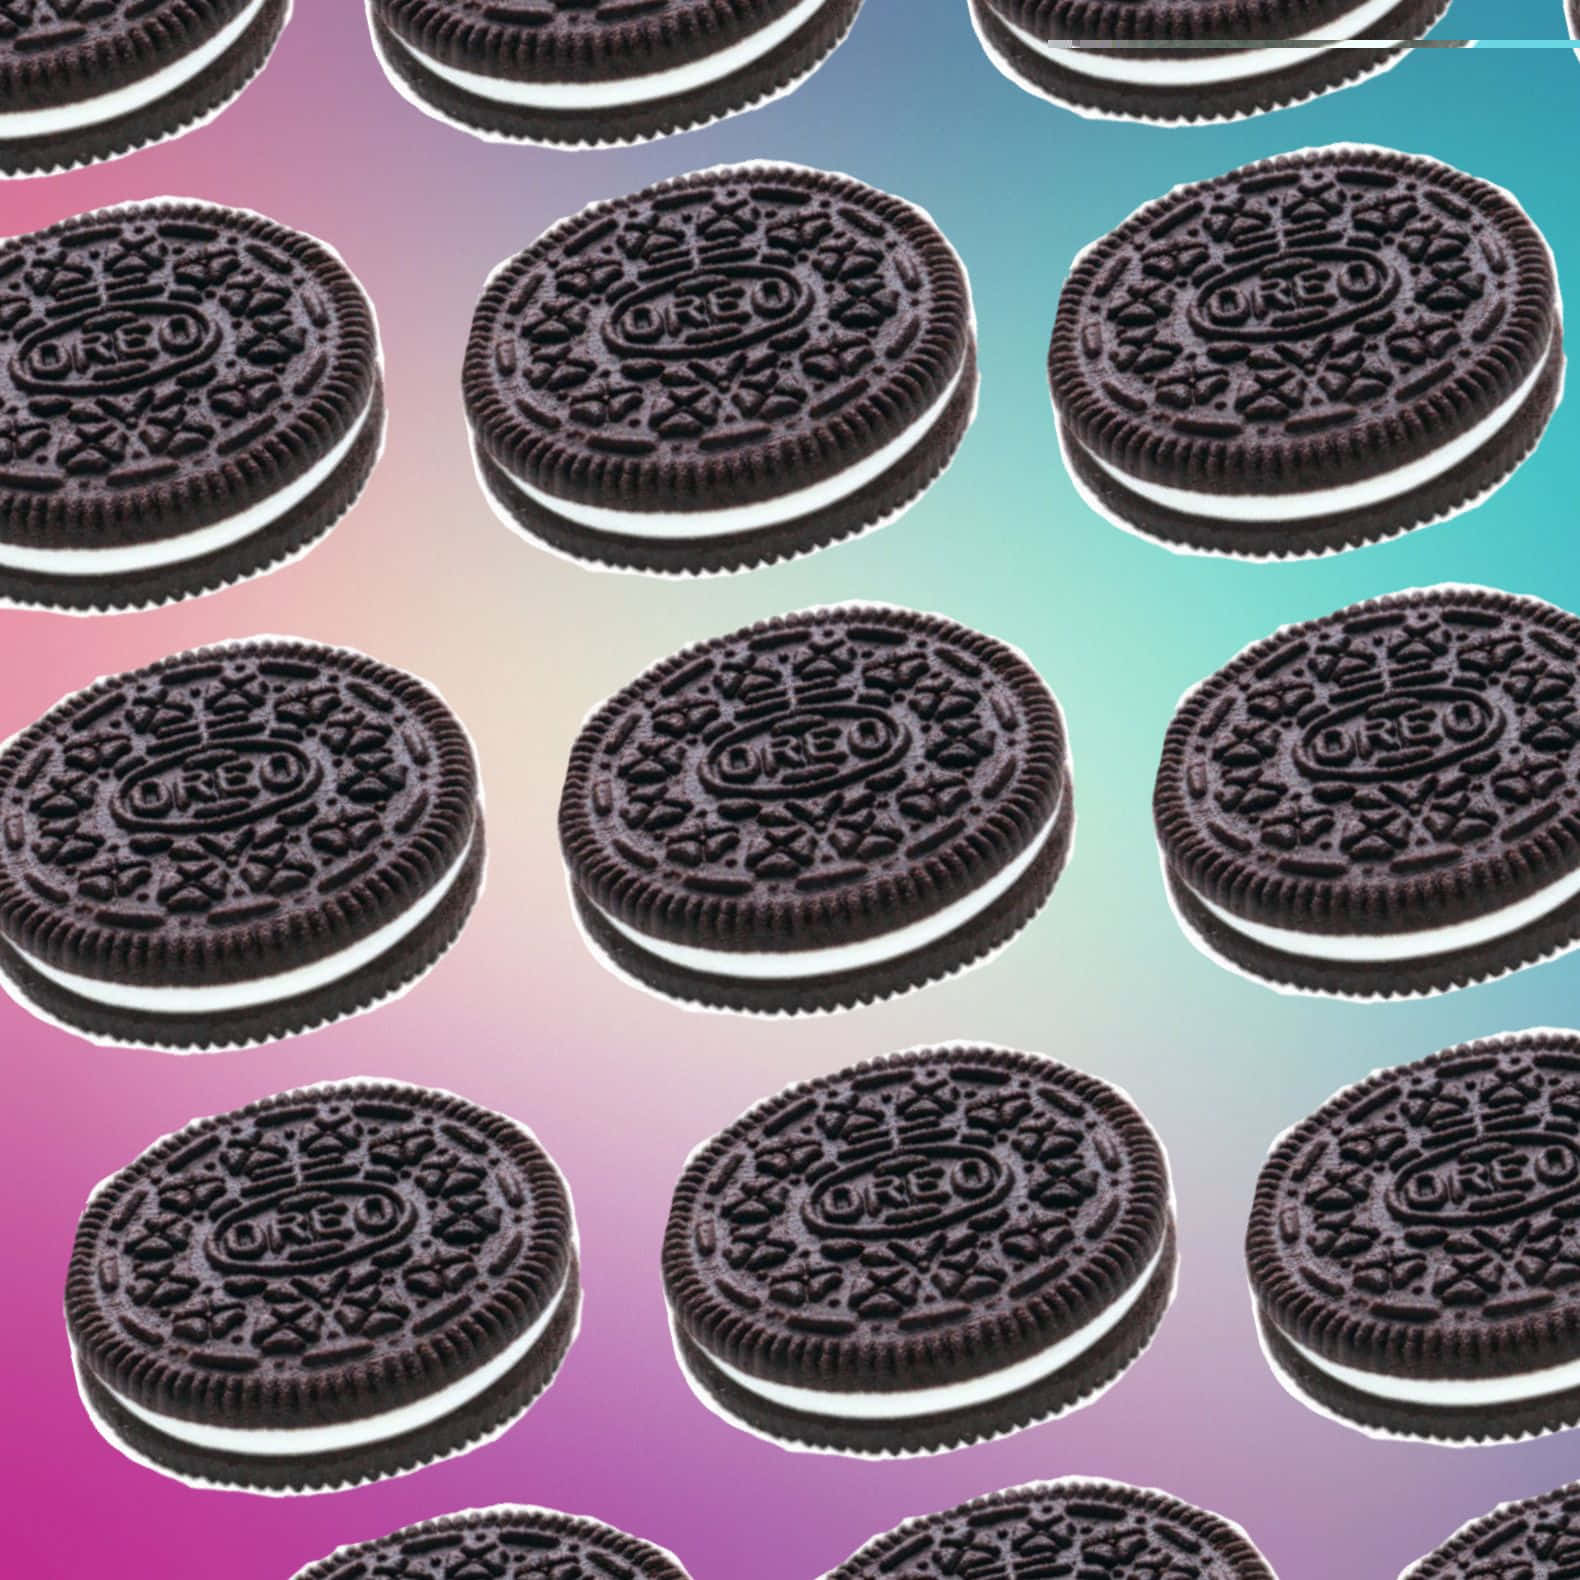 A pattern of Oreo cookies on a rainbow background - Oreo